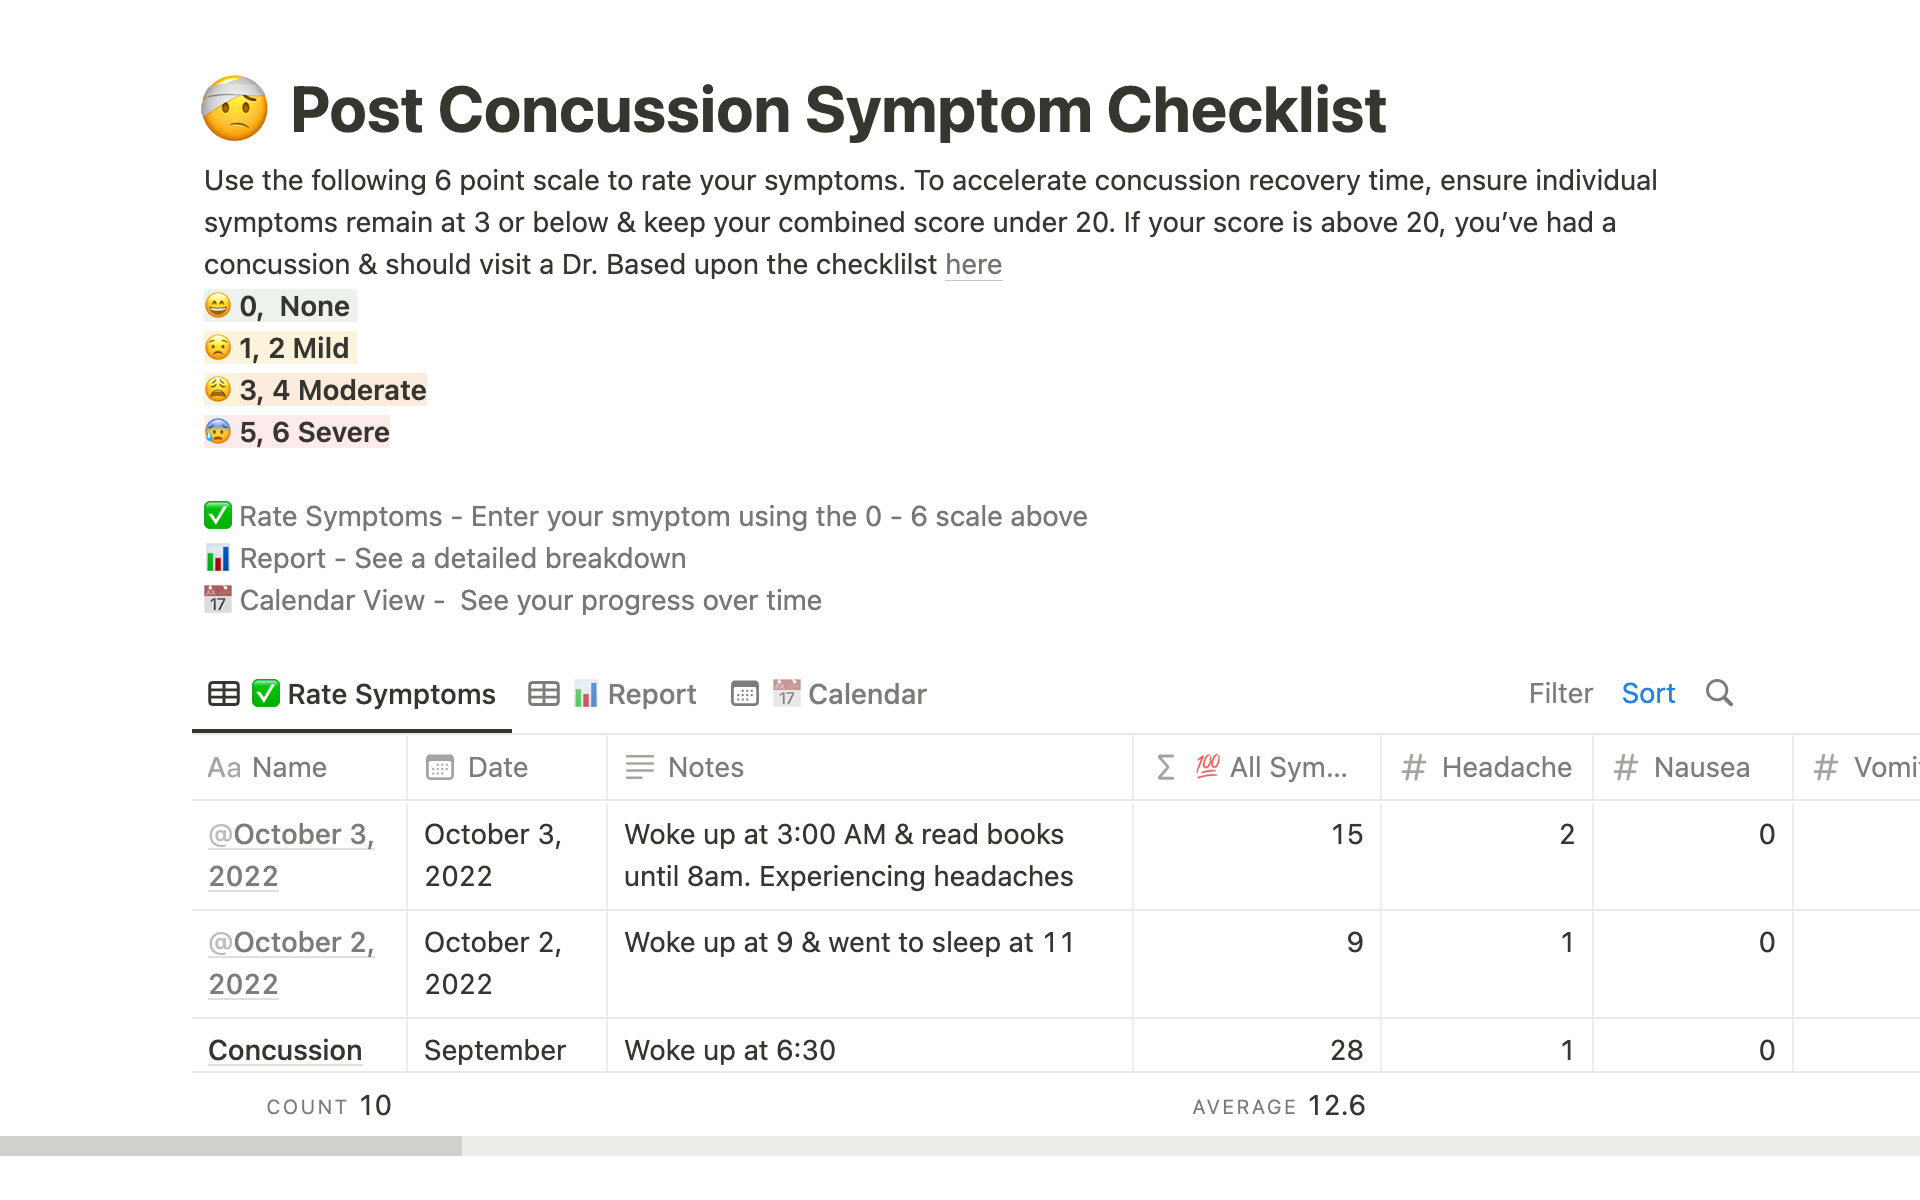 Track concussion symptoms daily & manage your recovery.